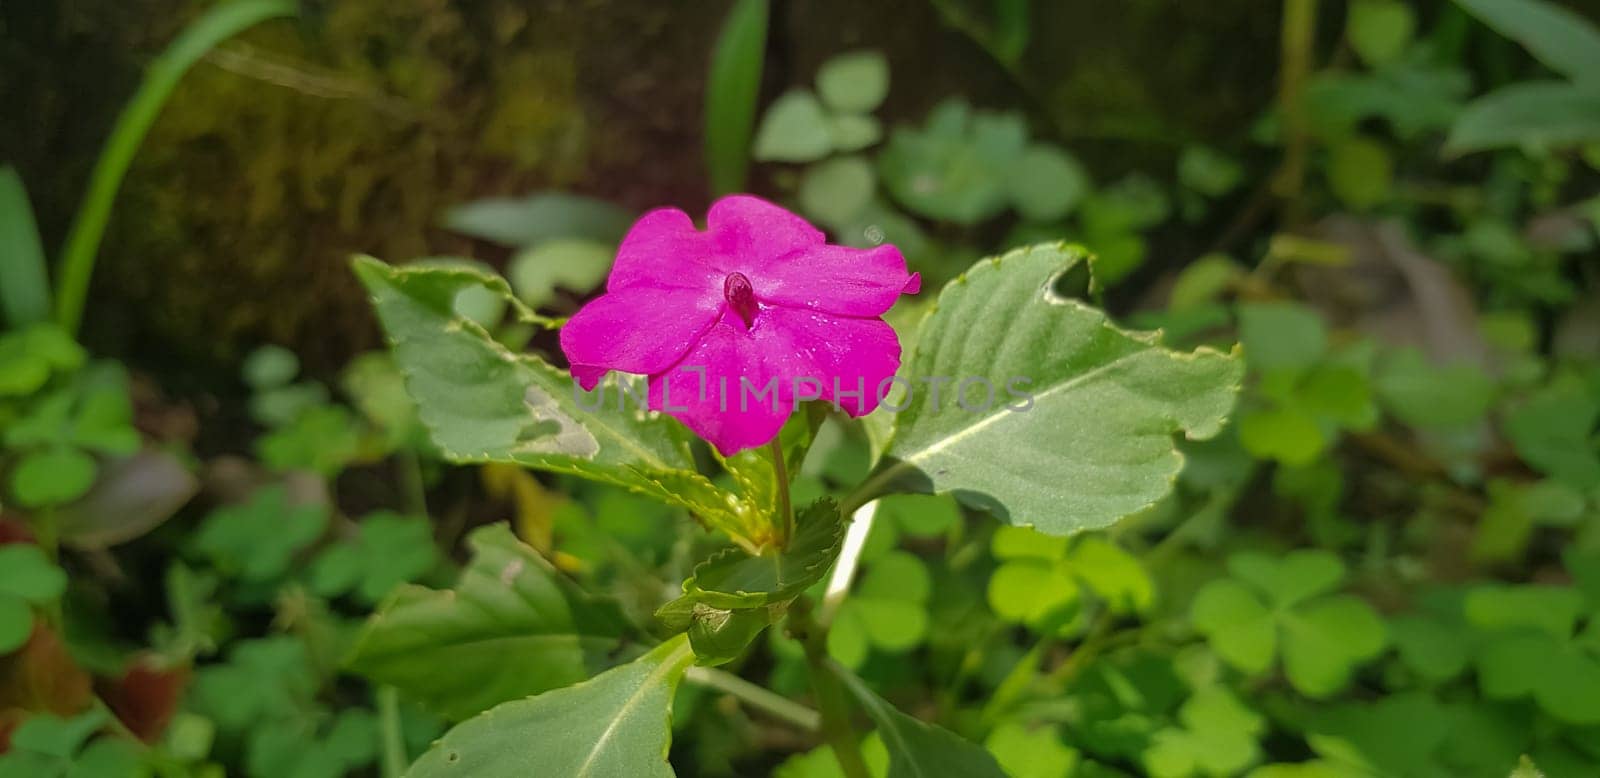 Busy Lizzie (Impatiens Walleriana) also known as Balsam, Sultana or Impatiens in Asia, Central Java Indonesia